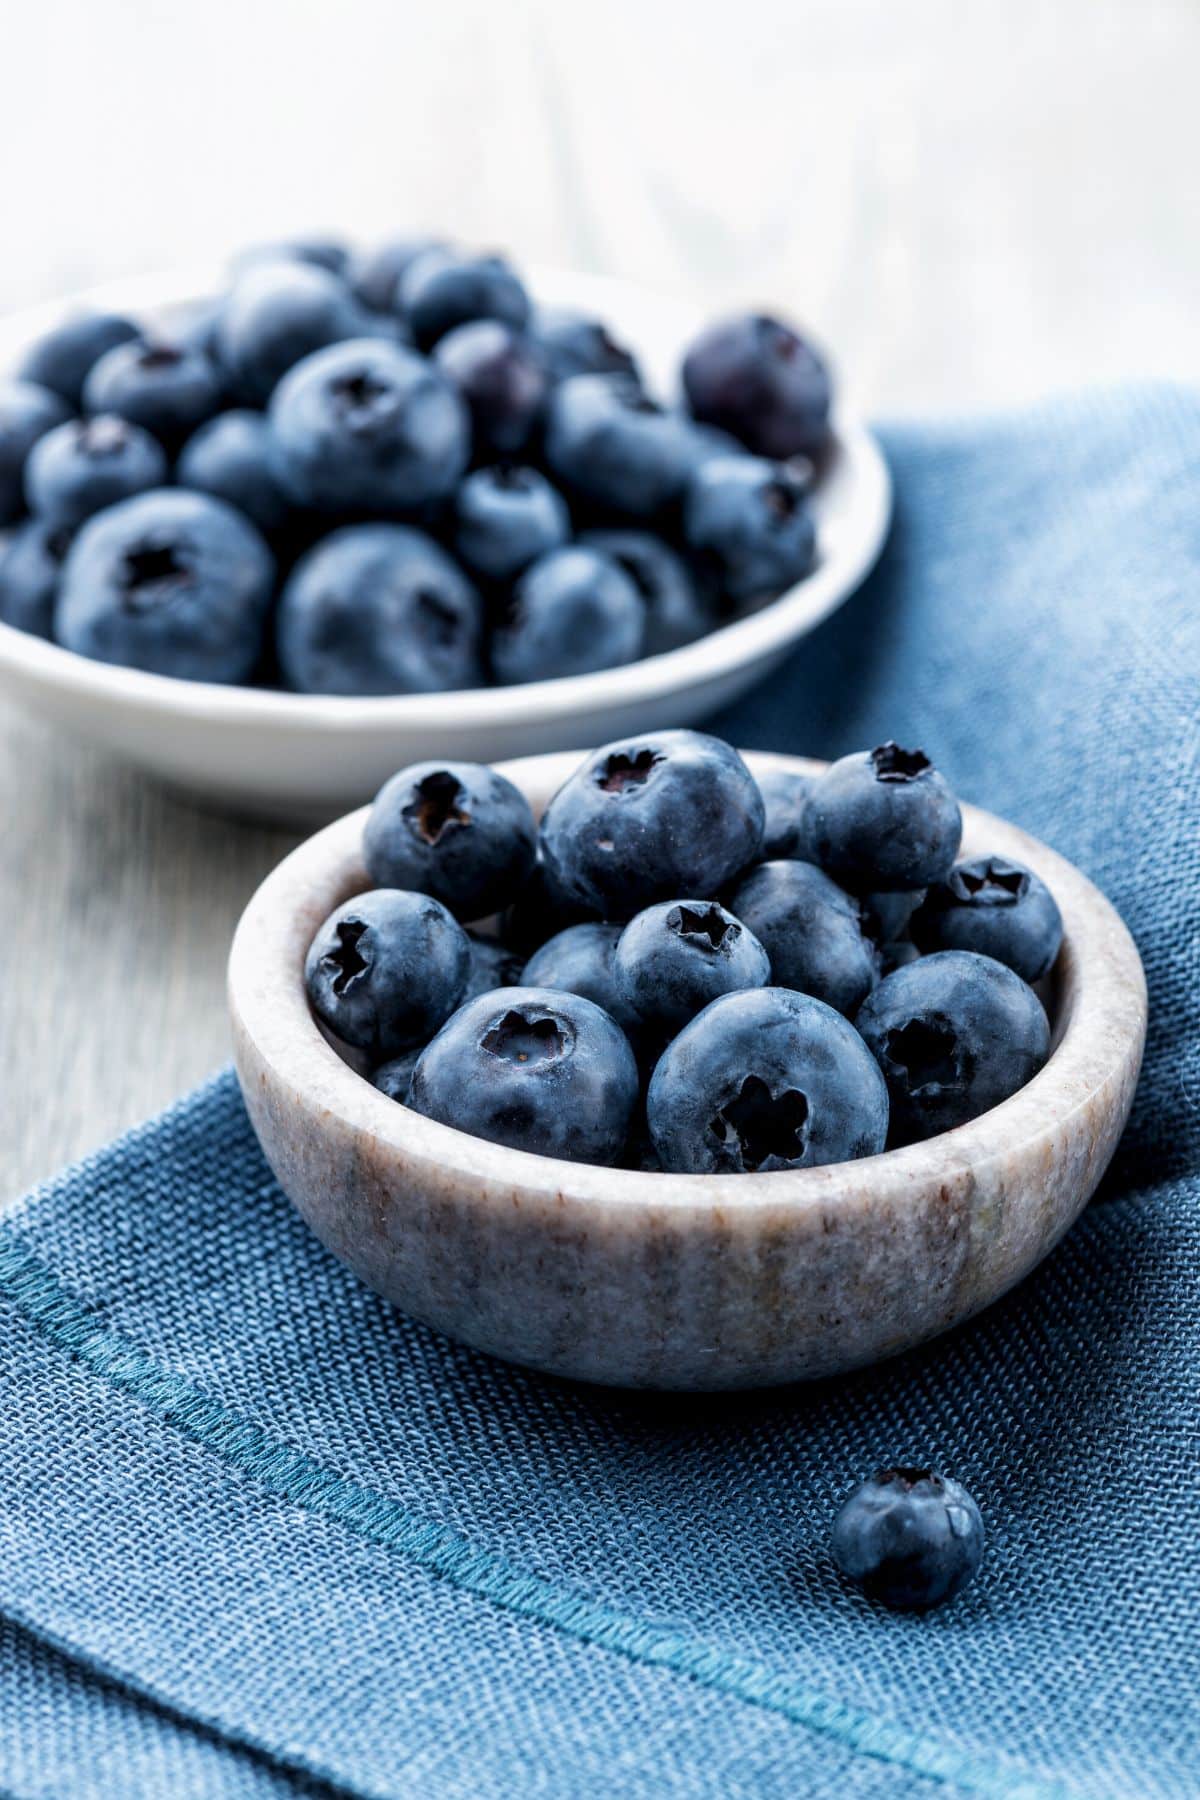 are blueberries keto friendly